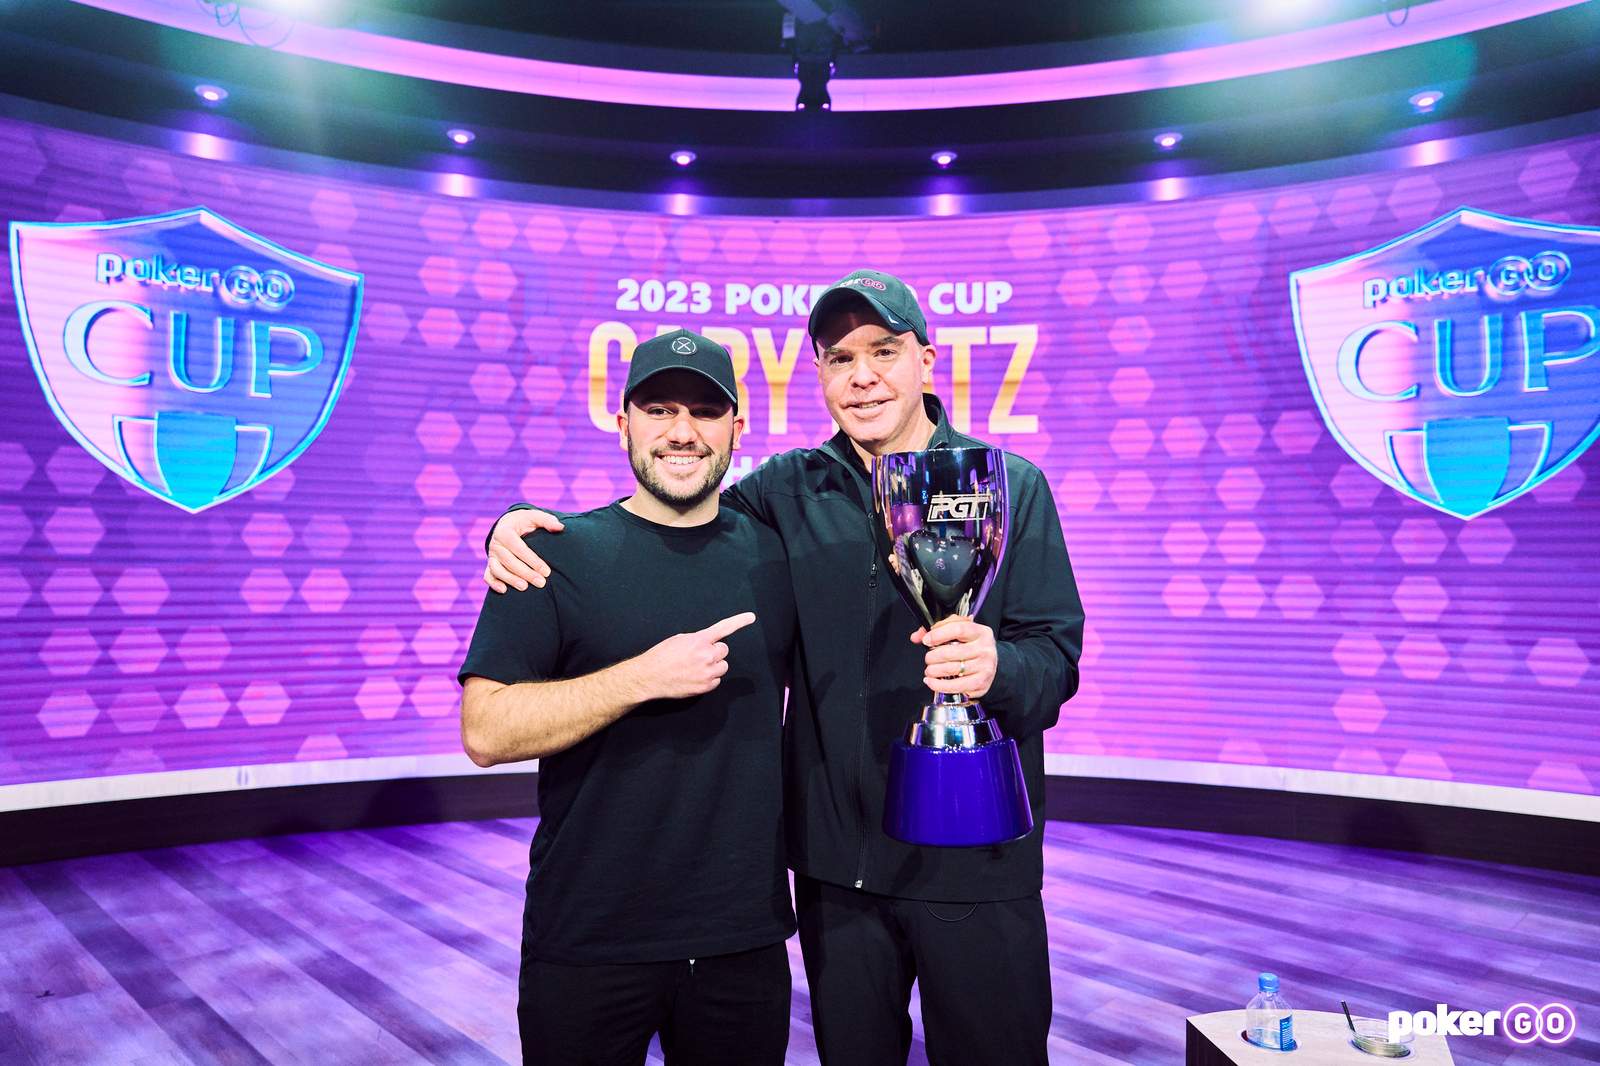 Cary Katz Crowned 2023 PokerGO Cup Champion